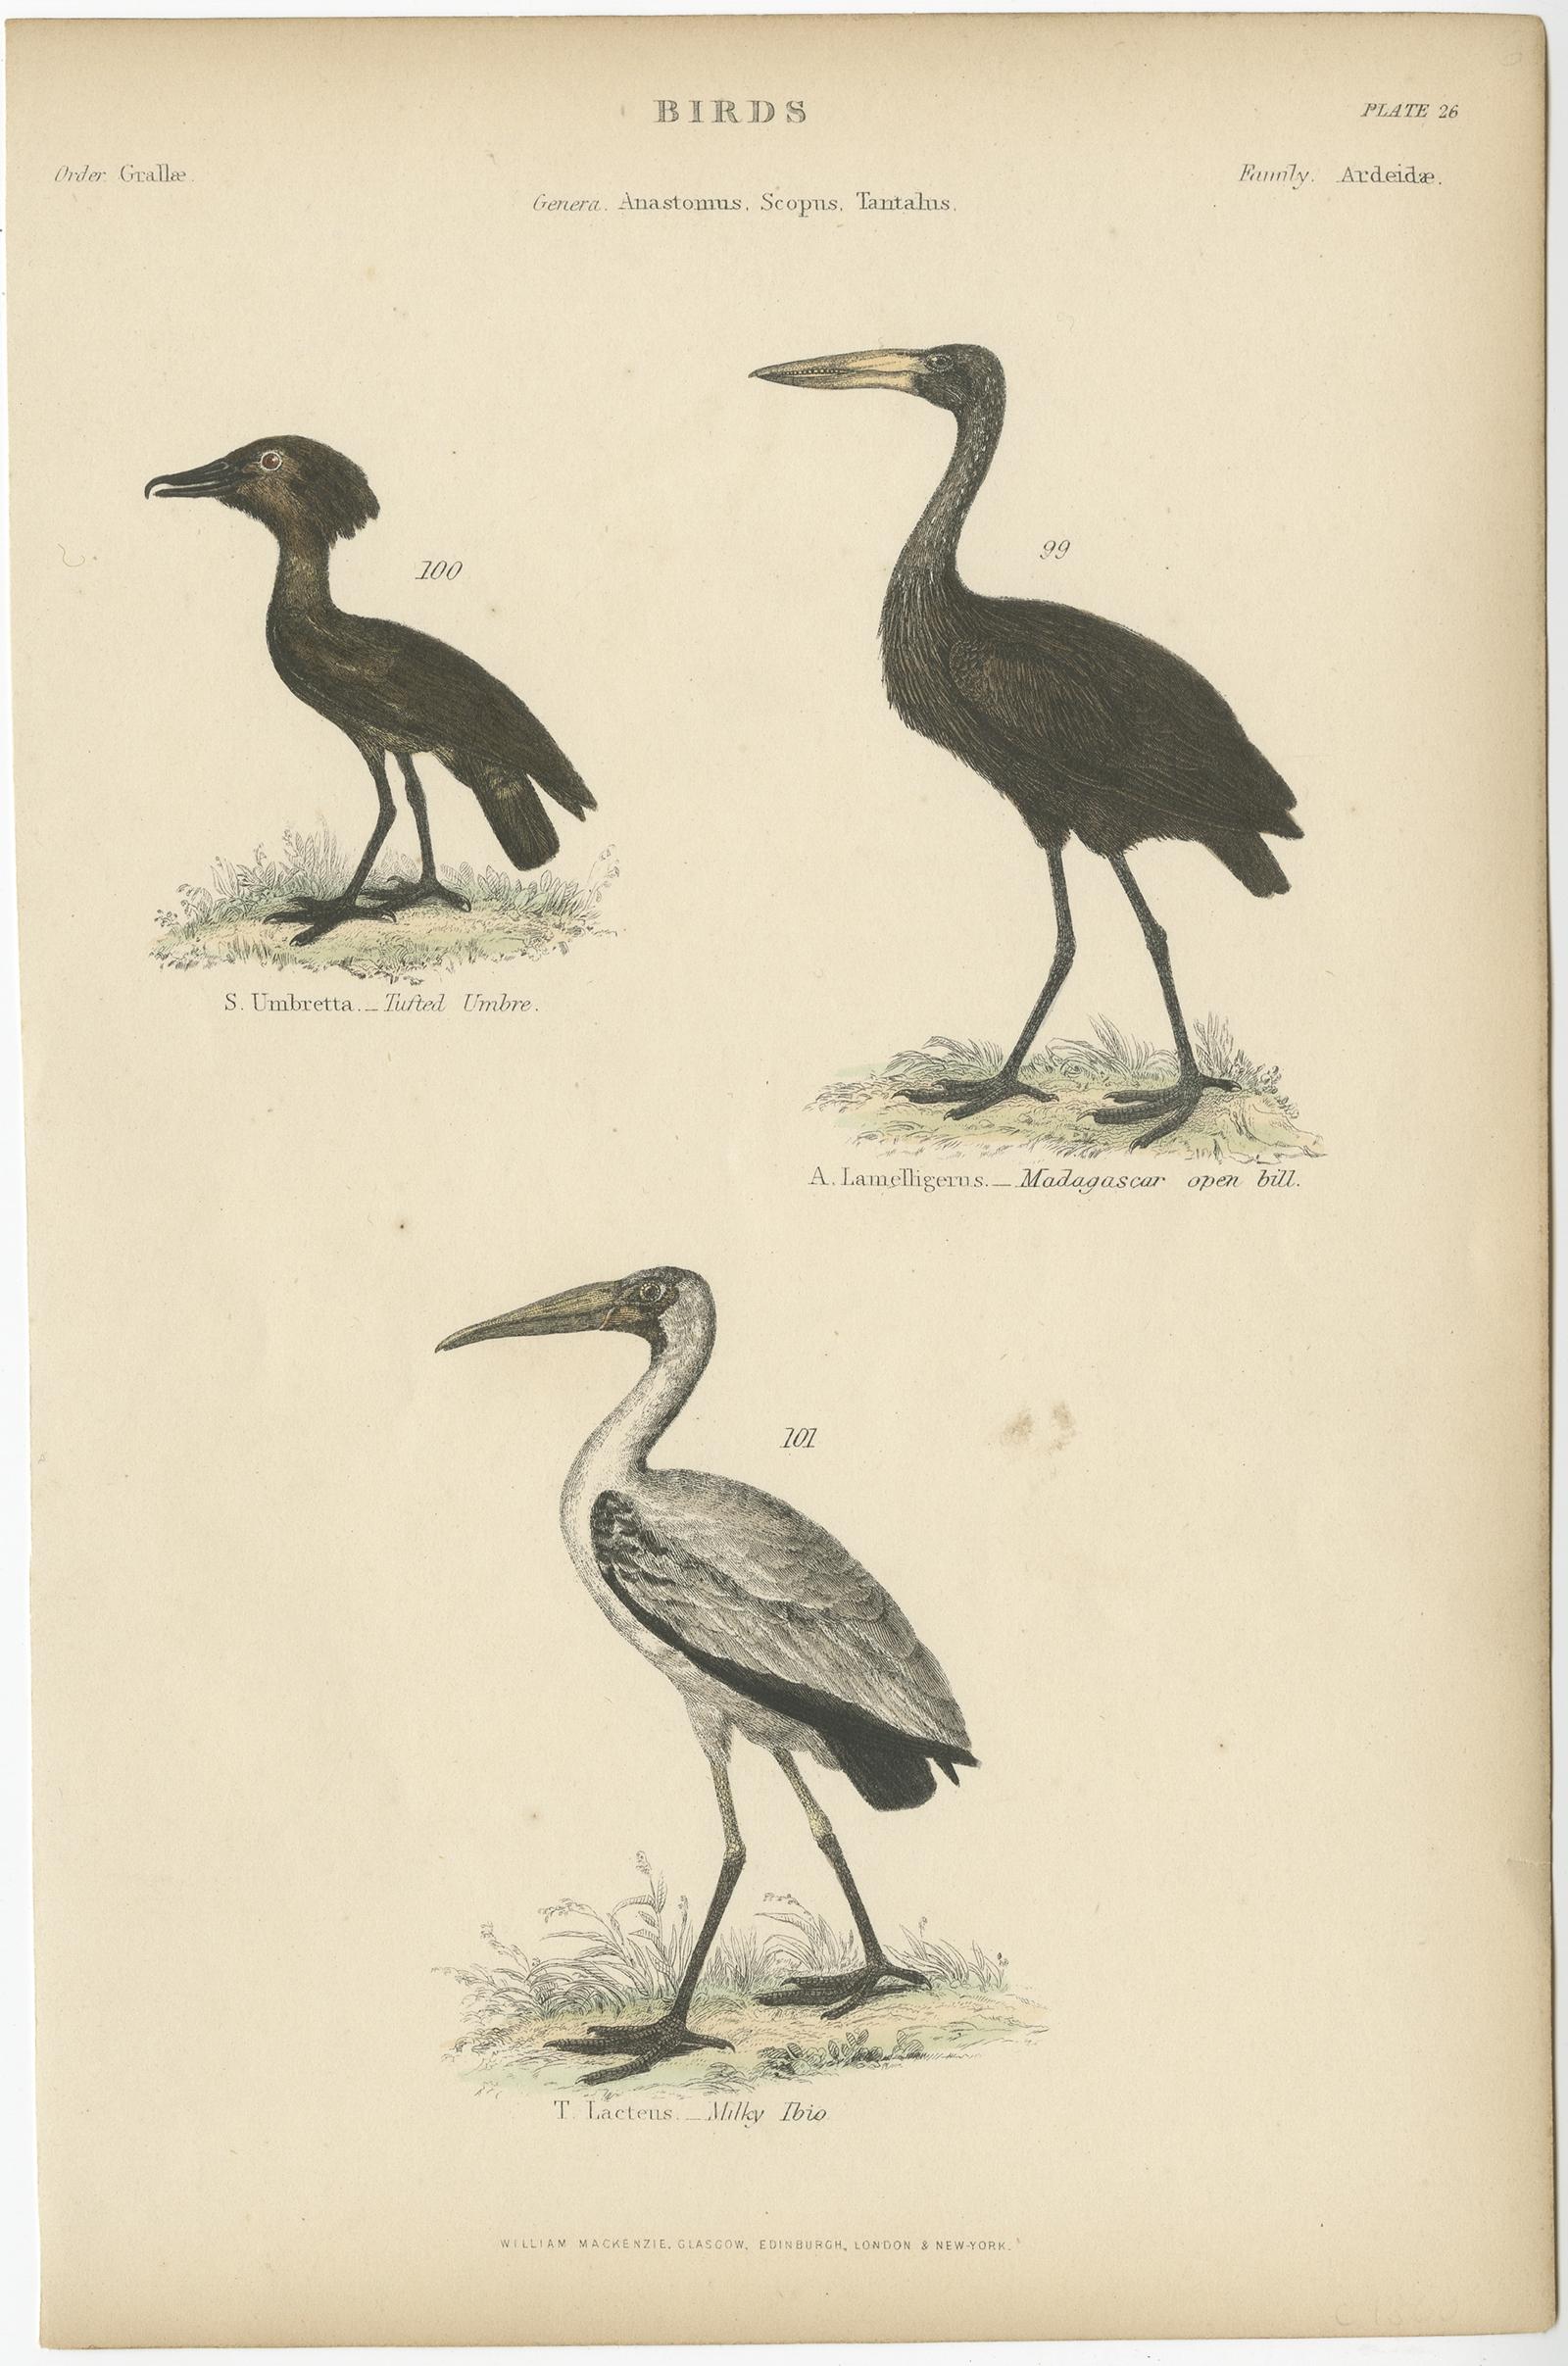 Antique bird print depicting the tufted umbre, Madagascar open bill and milky ibis. 

This print originates from 'Museum of Natural History' by Sir John Richardson.

Artists and Engravers: Published by William Mackenzie.